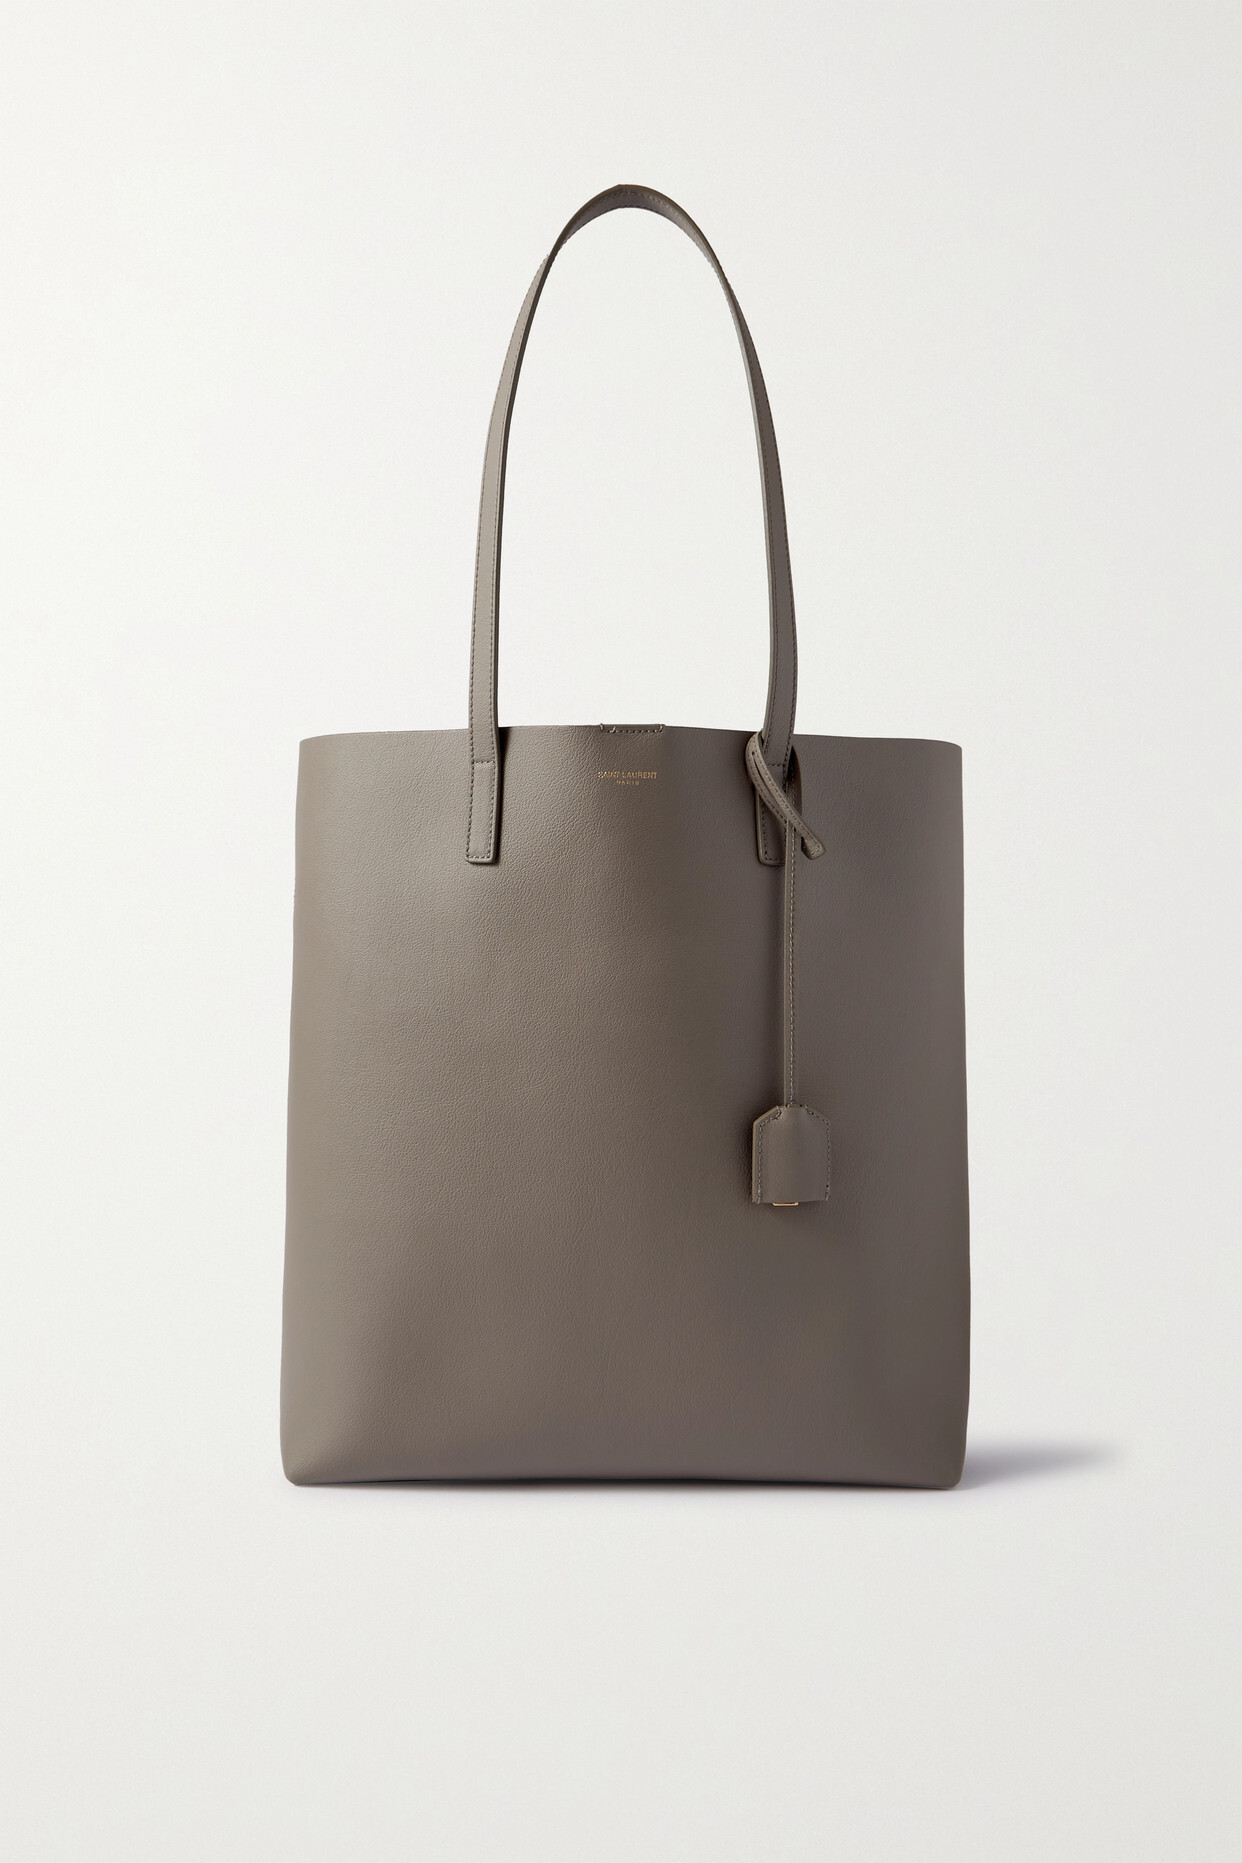 SAINT LAURENT - East West Large Leather Tote - Brown